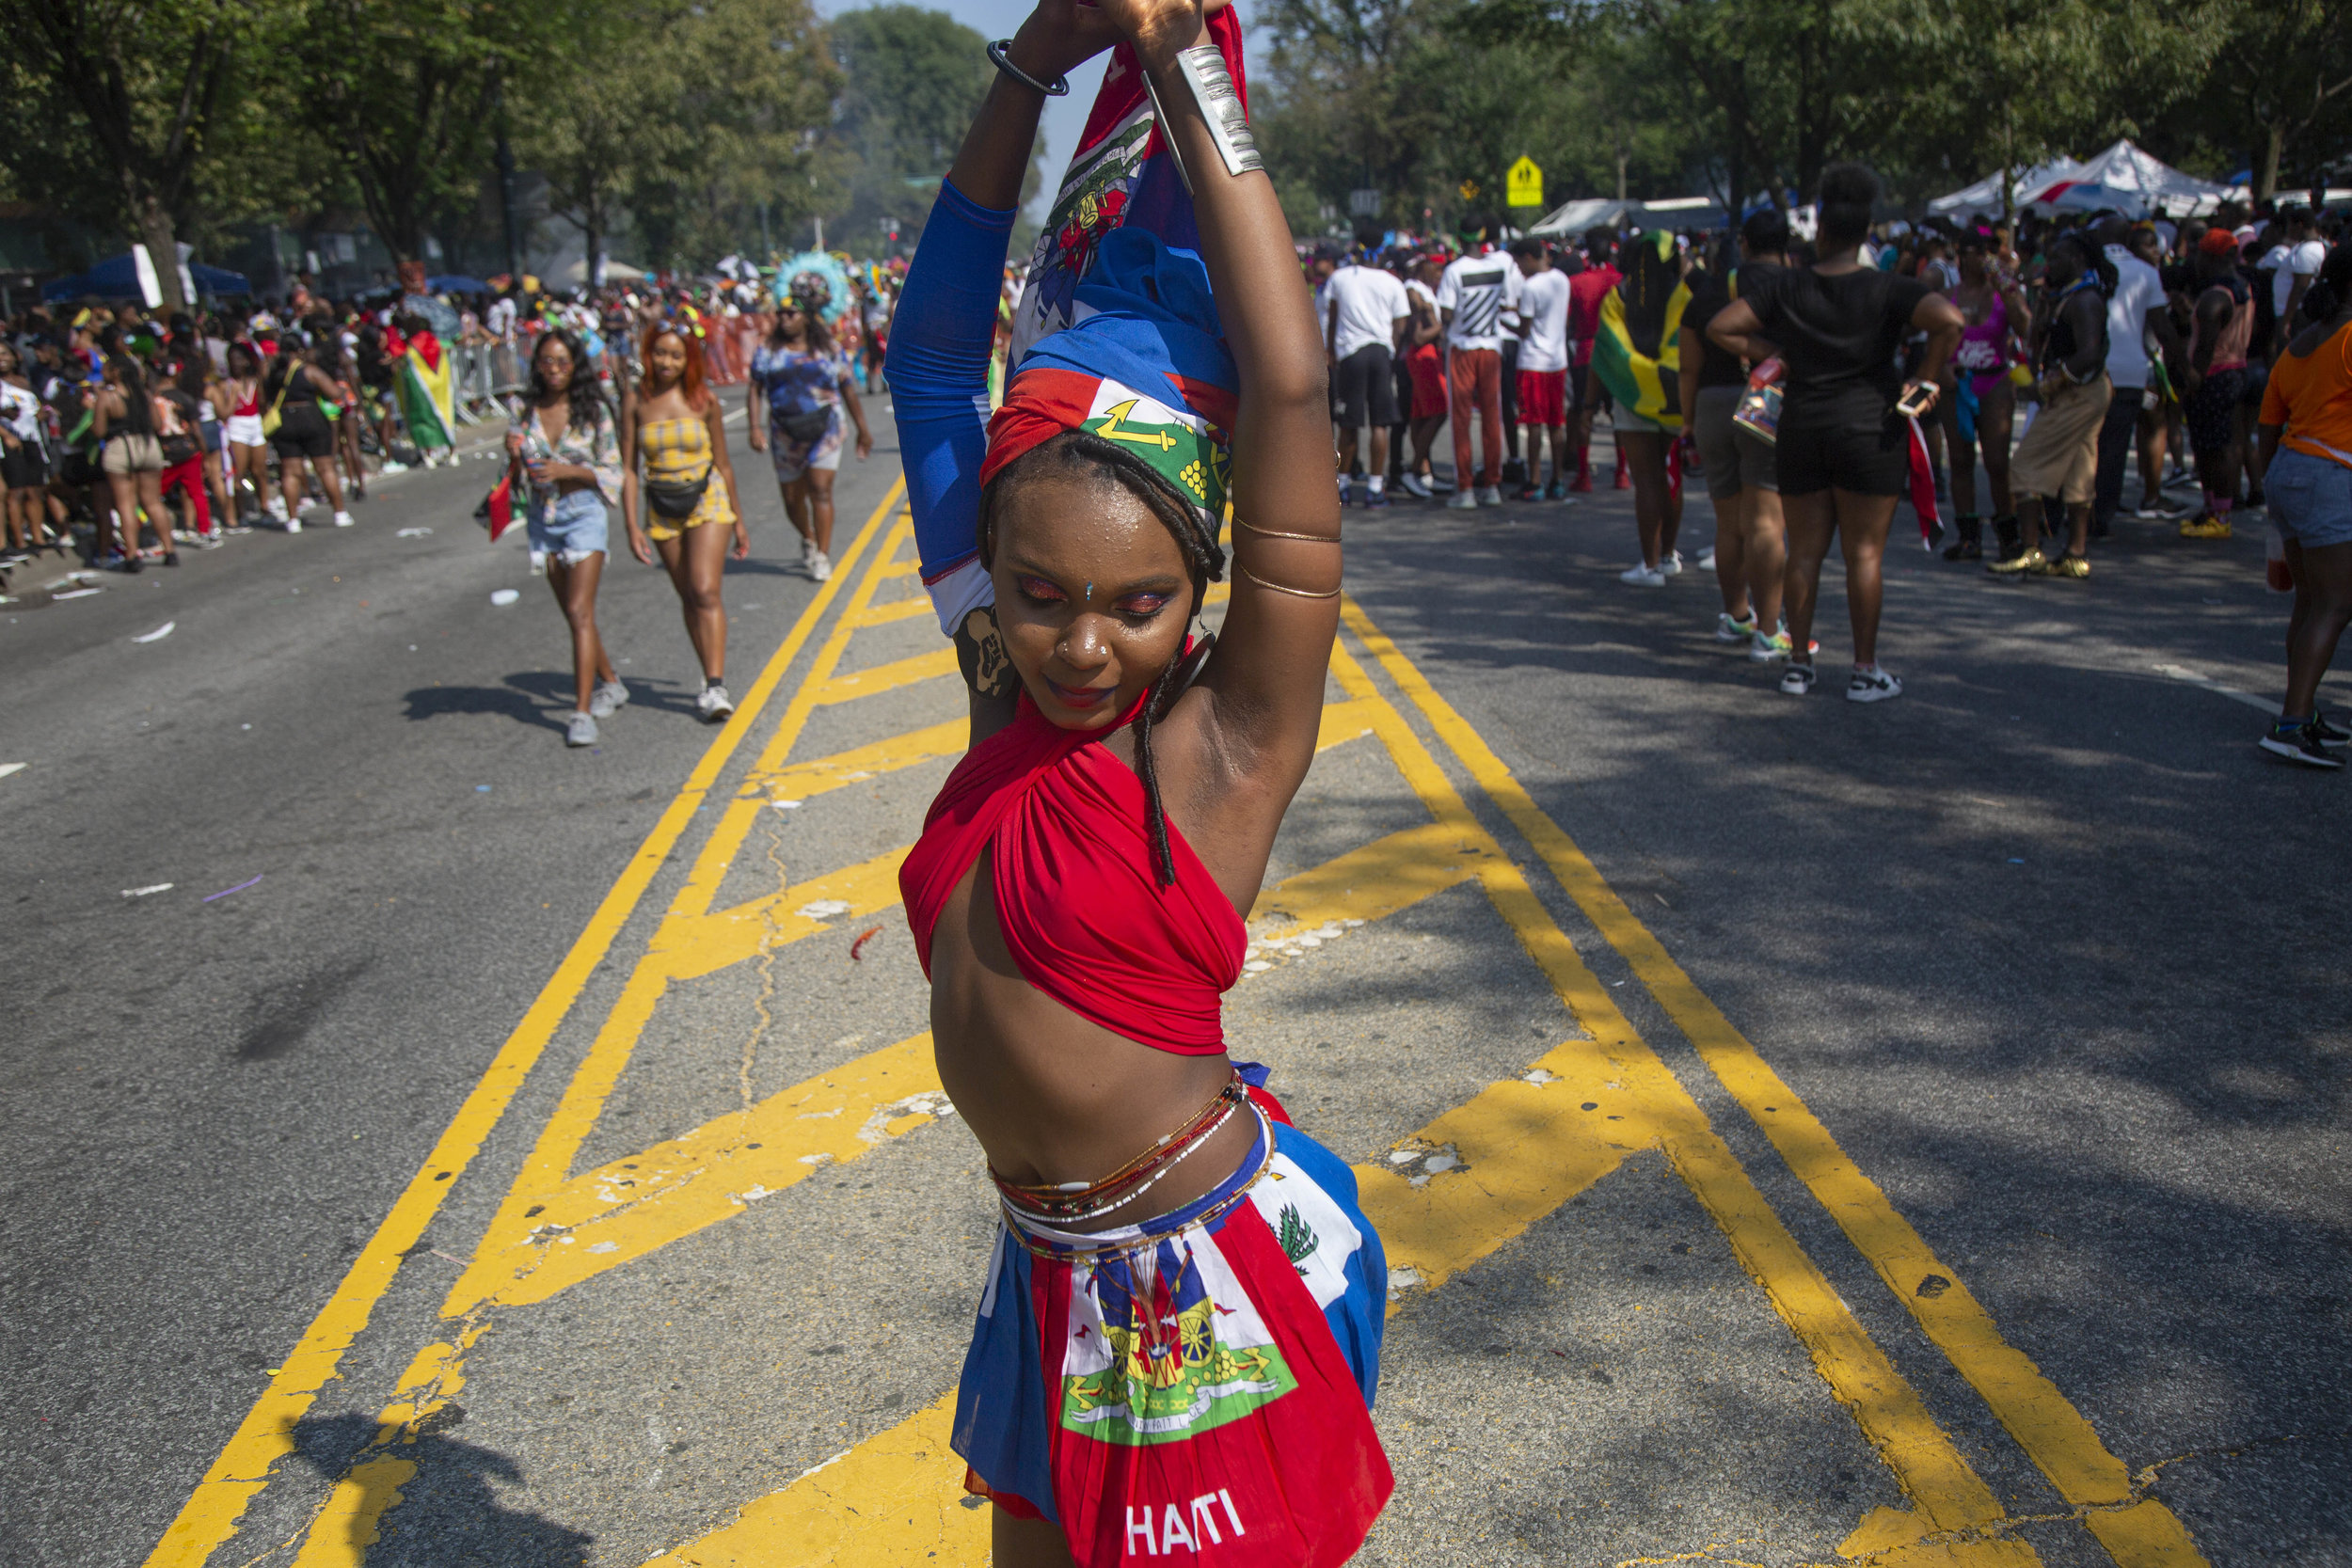 West Indian Day Parade, 2018